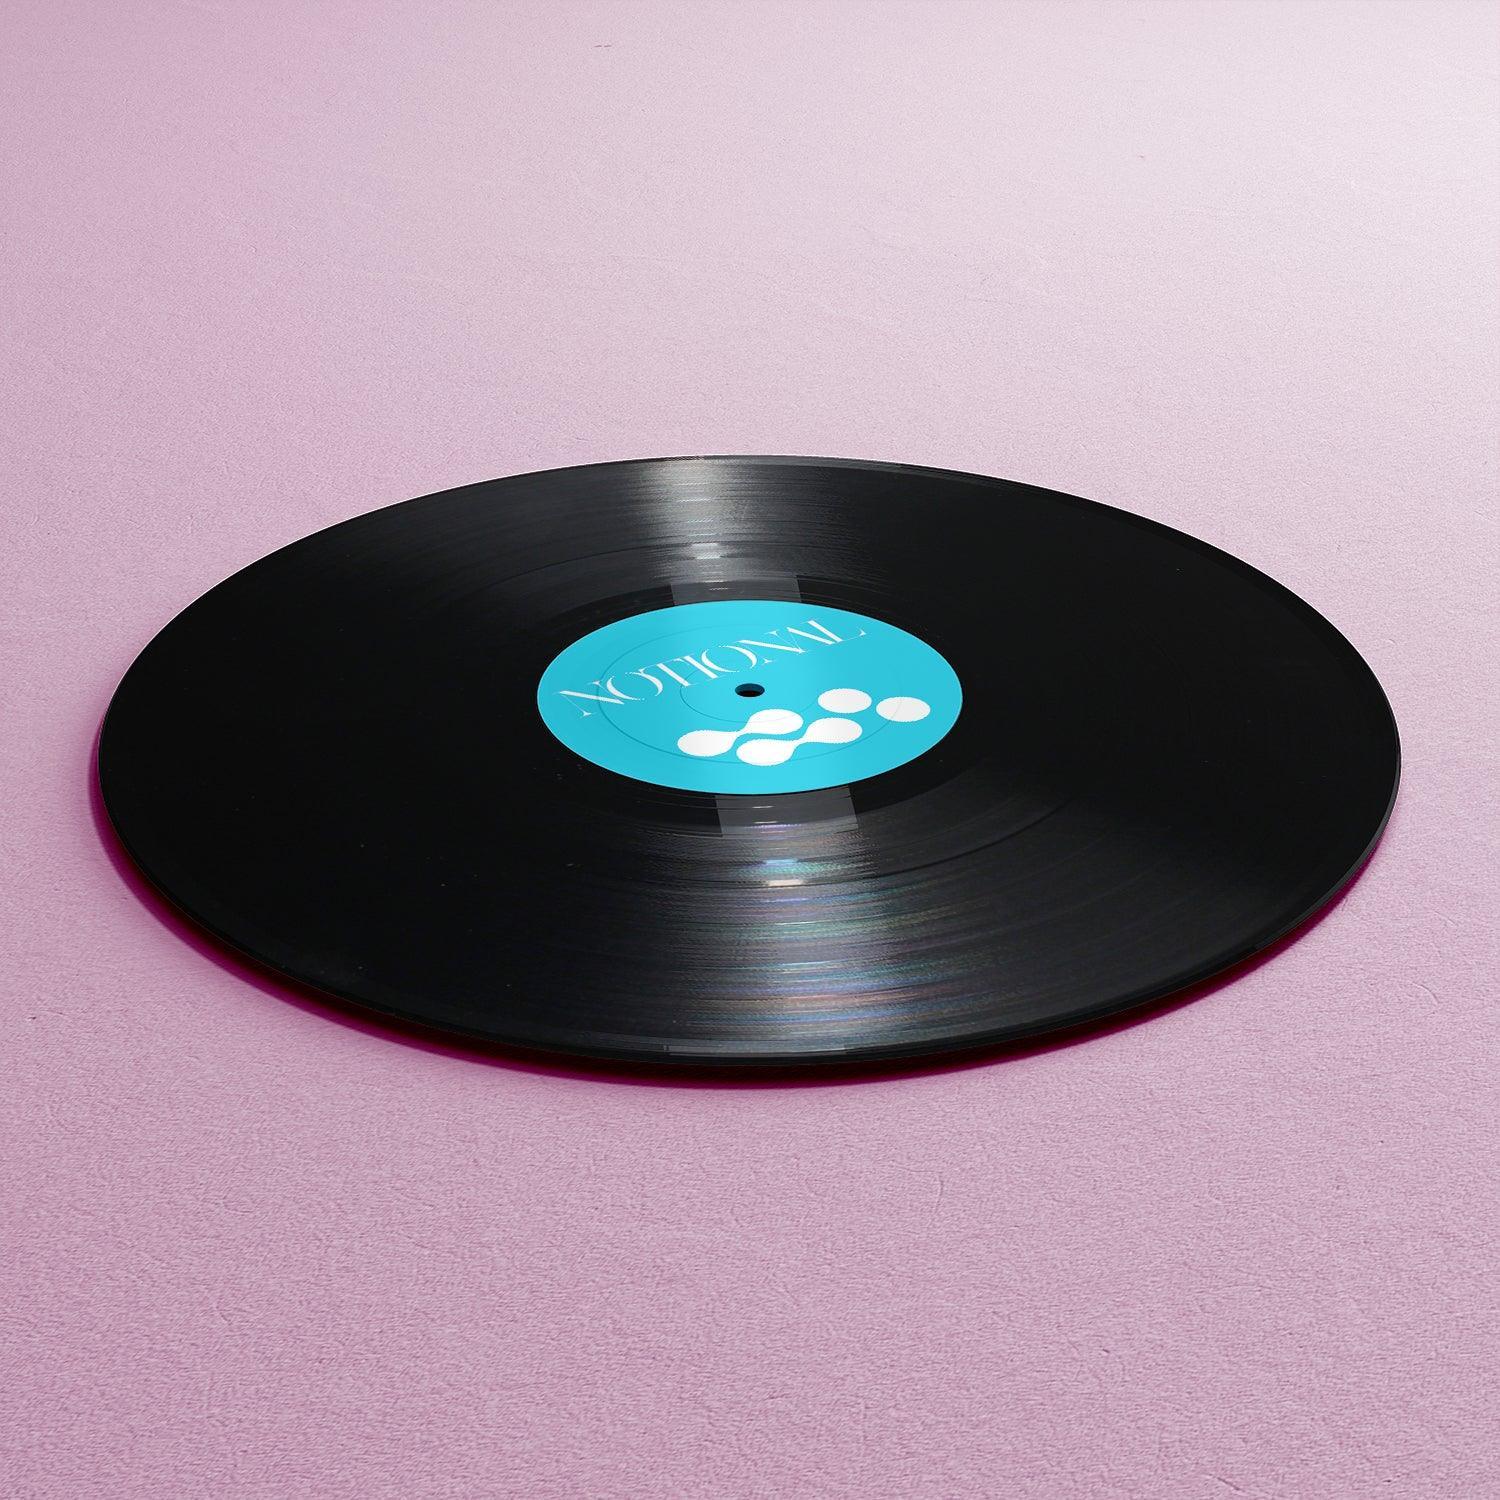 Customizable 12" Vinyl Record Template with Download Card. Showcase Your Music in Style